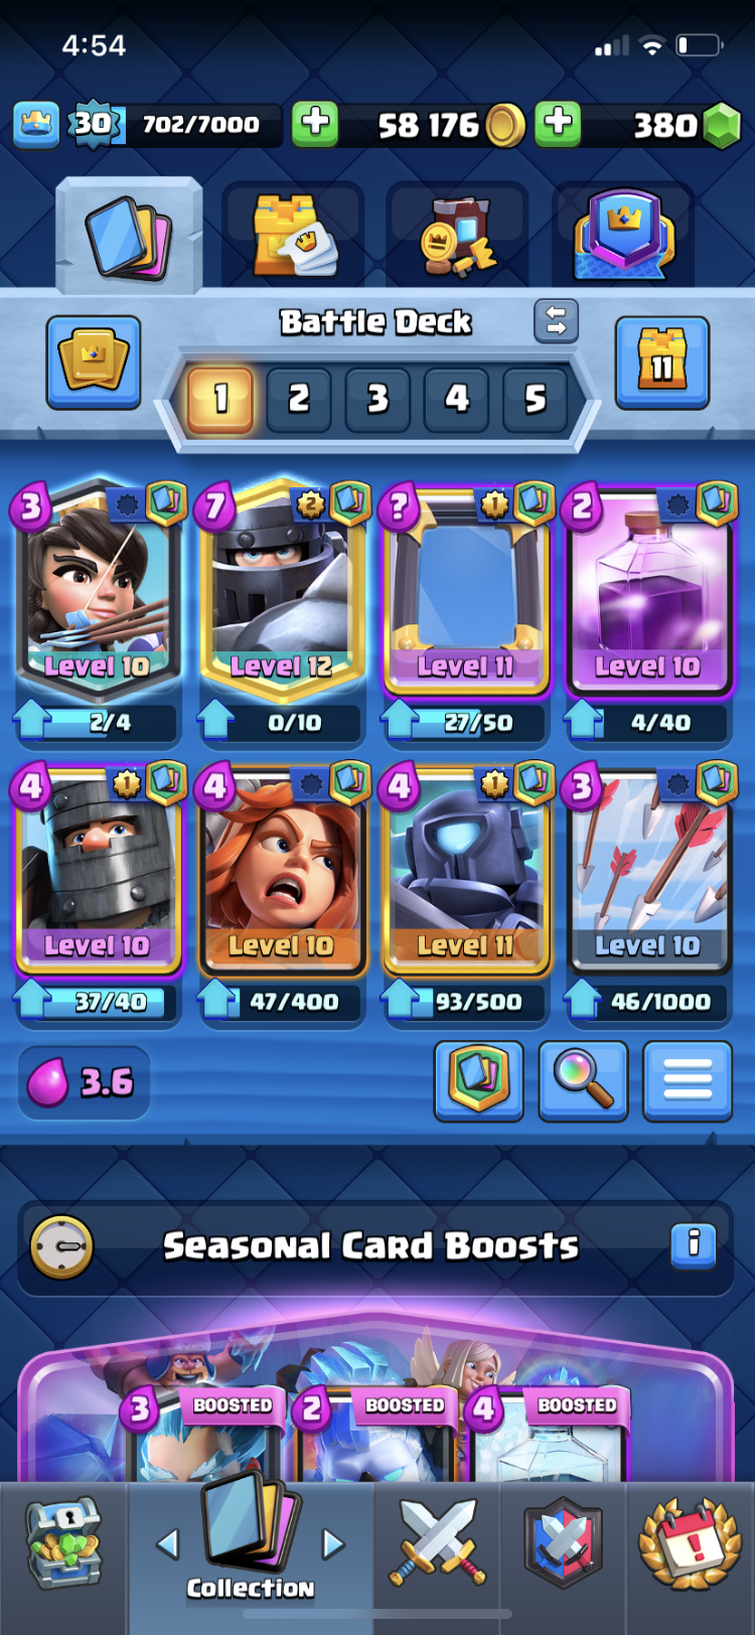 Can Someone Help Me Make a Deck in CR Arena 14 So Annoying